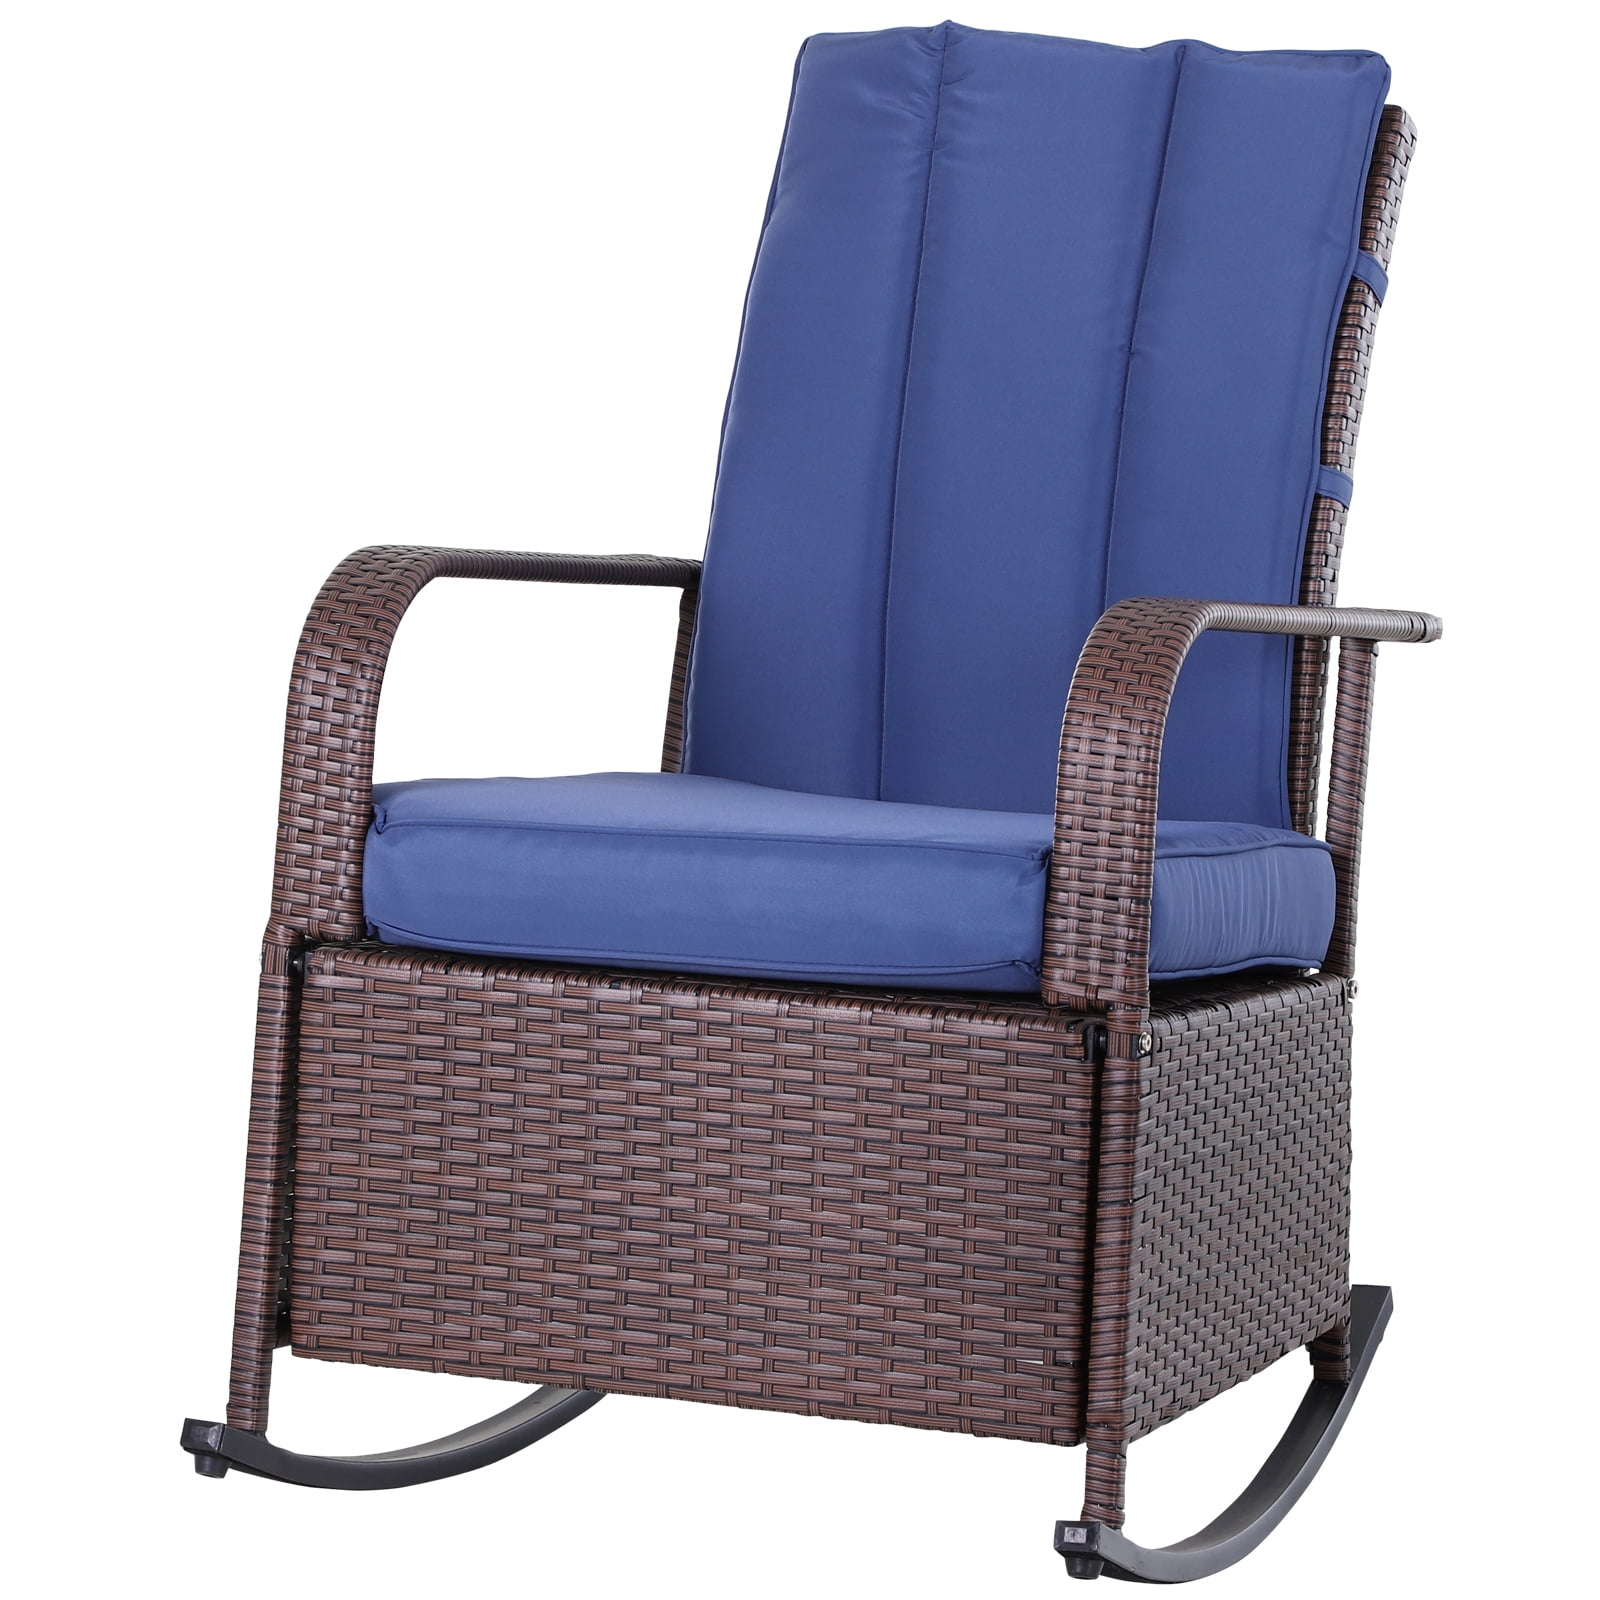 Reclining Patio Chairs With Cushions - homepatio.cloud